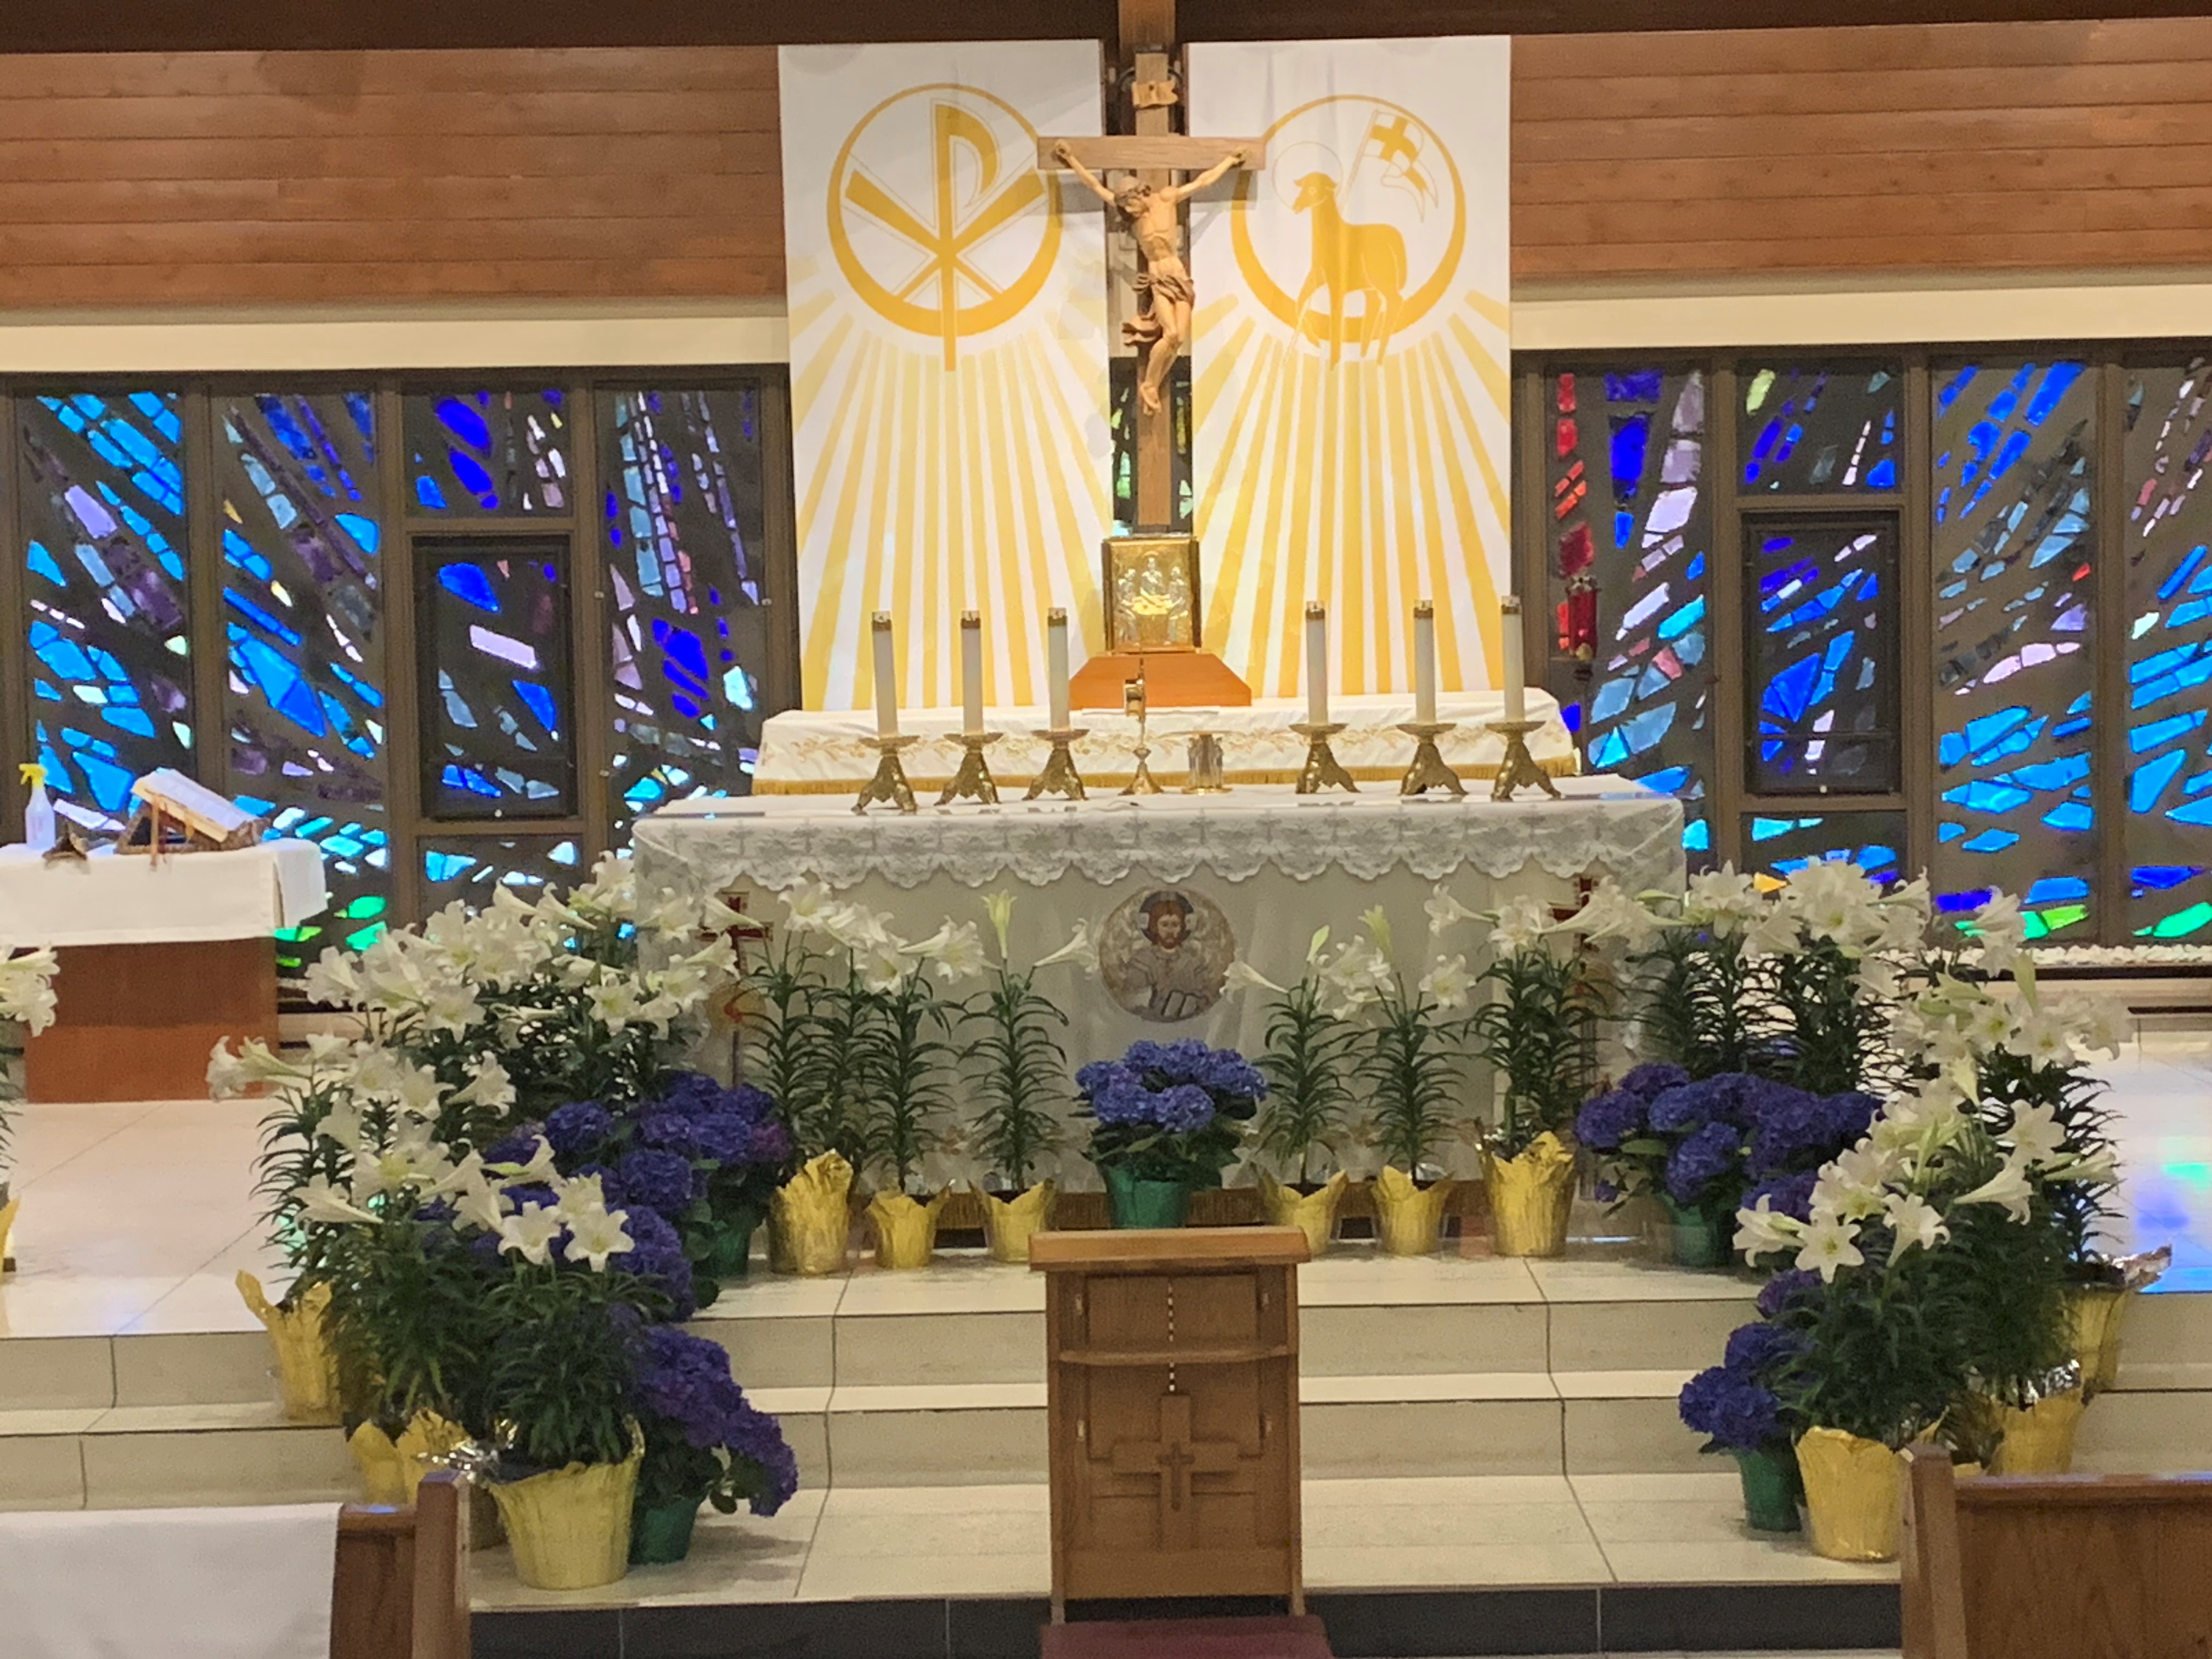 A full view of the Altar & Tabernacle taken during the Easter Season